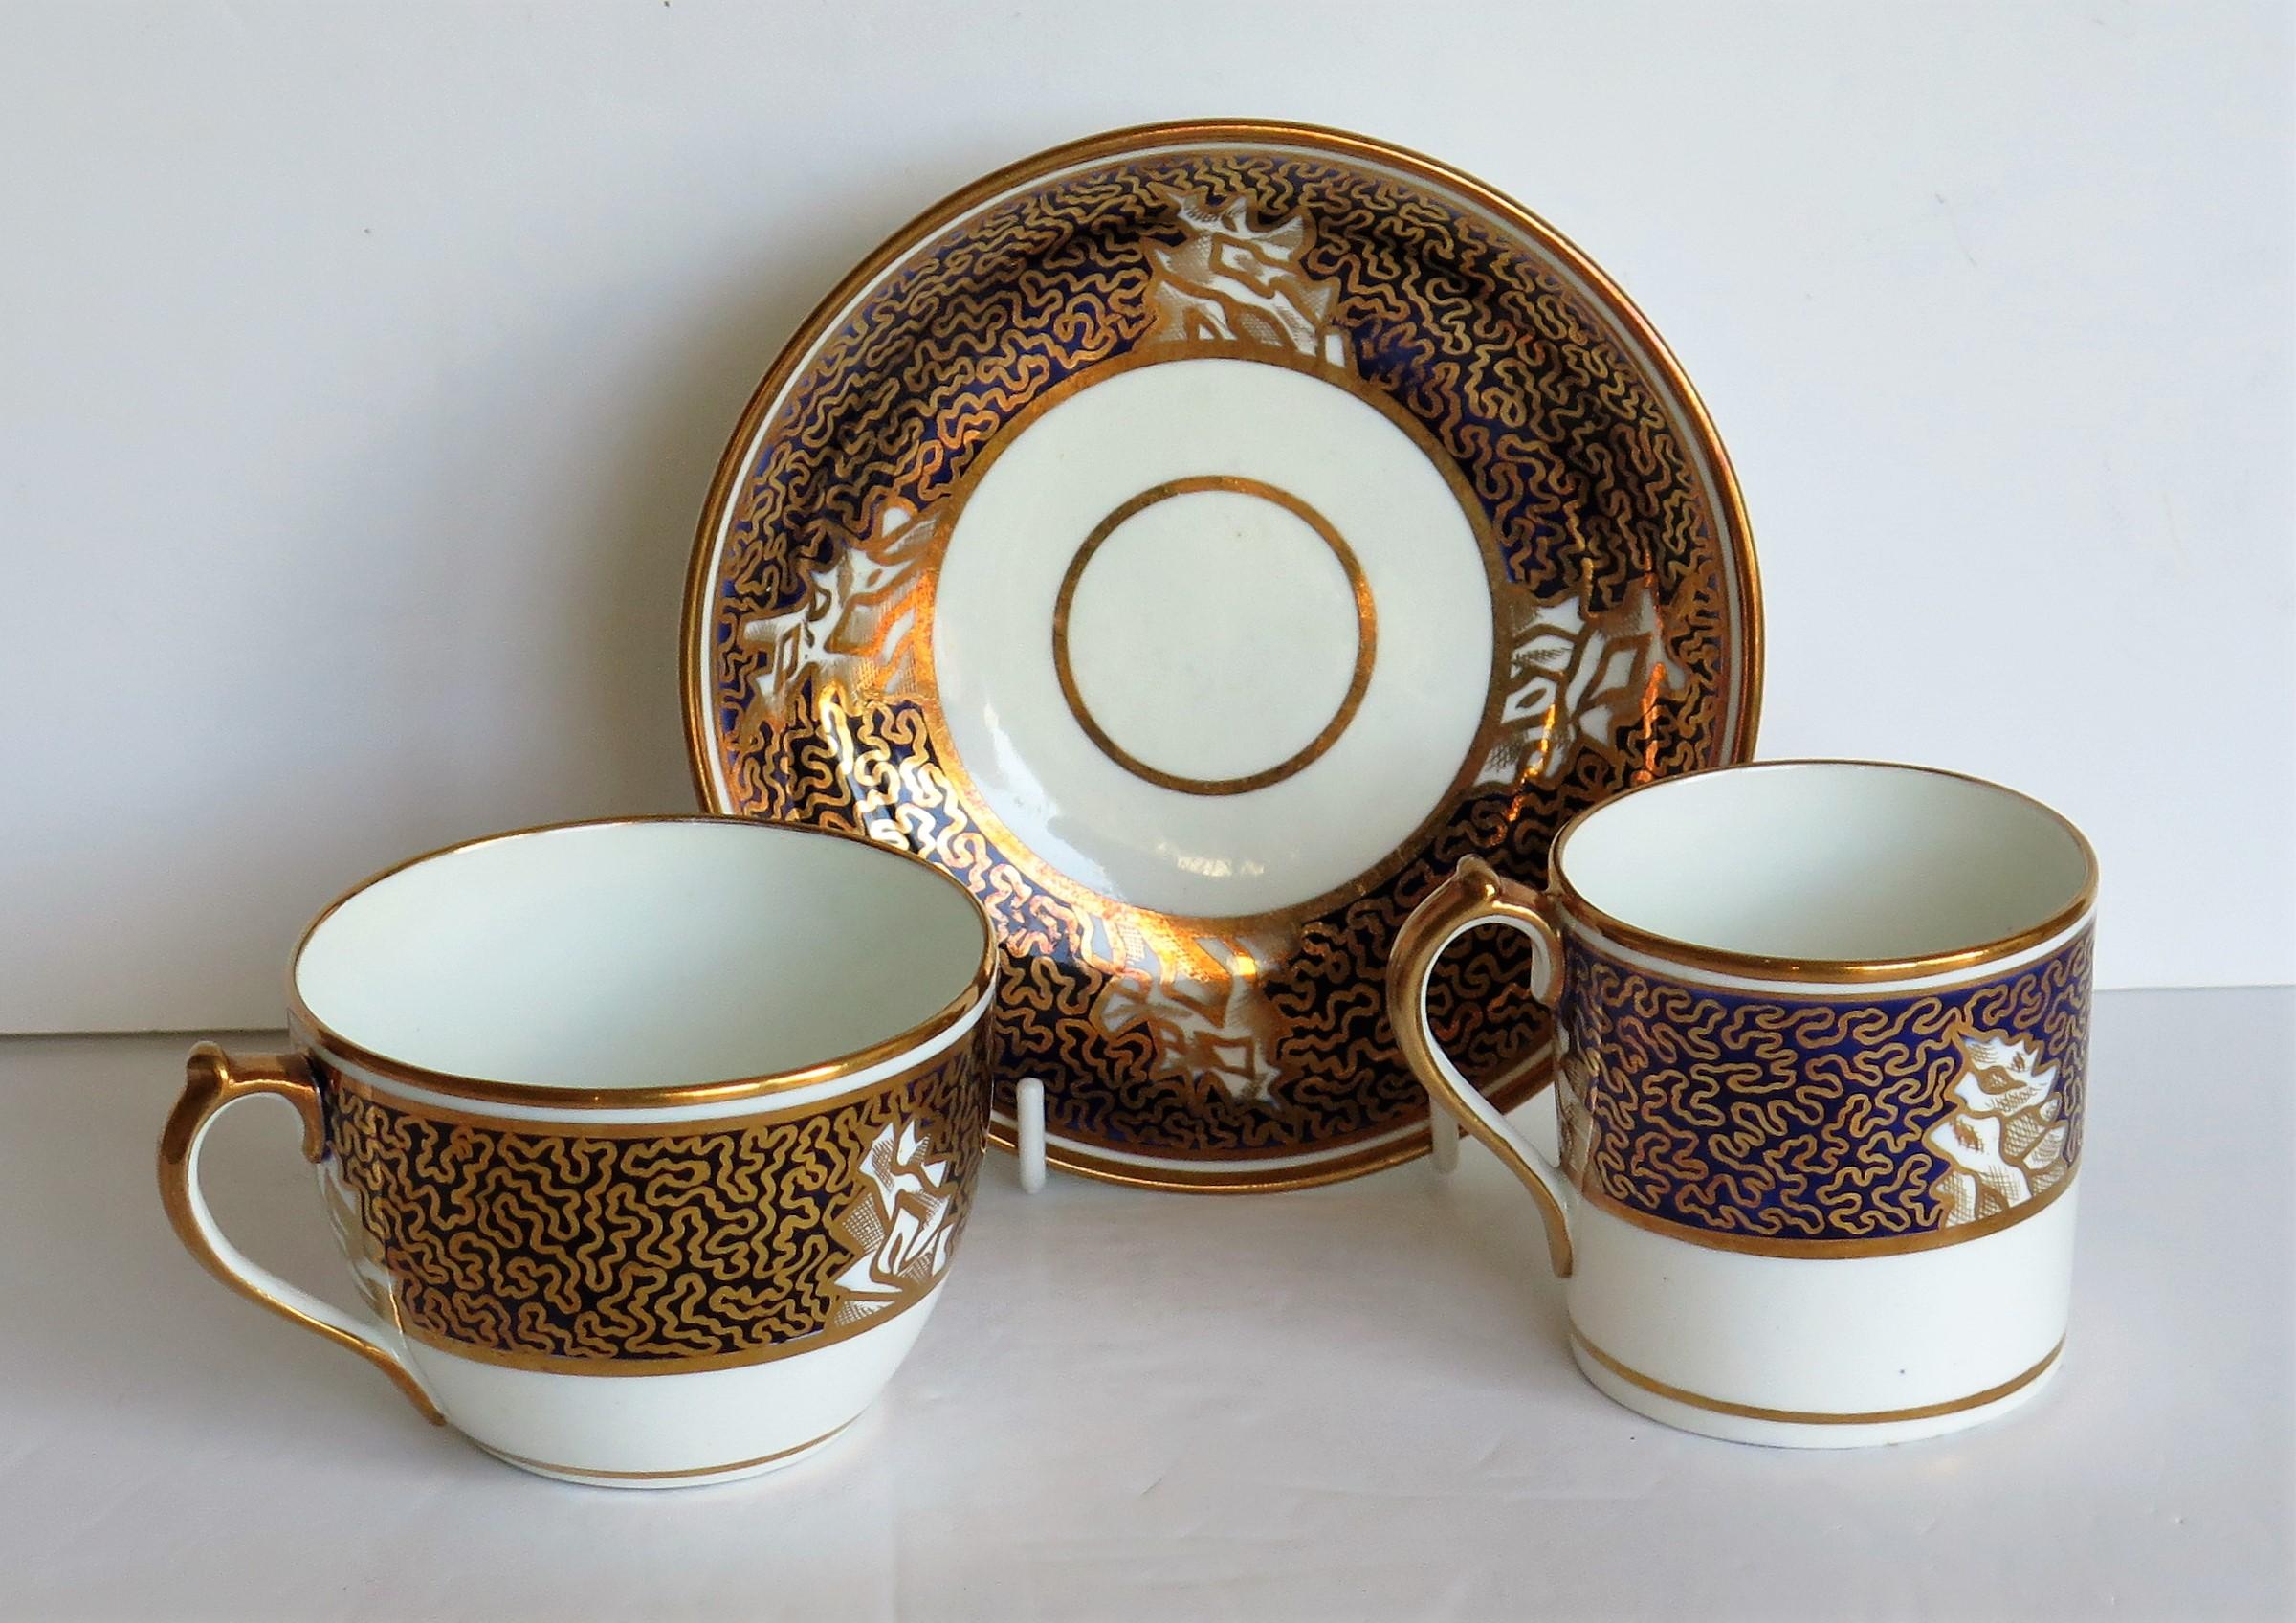 This is a fine porcelain blue and gilt trio comprising a coffee cup, tea cup and saucer in pattern number 470 made by Miles Mason (Mason's), Staffordshire Potteries, in the early 19th century George 111rd period, circa 1805-1810.

All pieces are